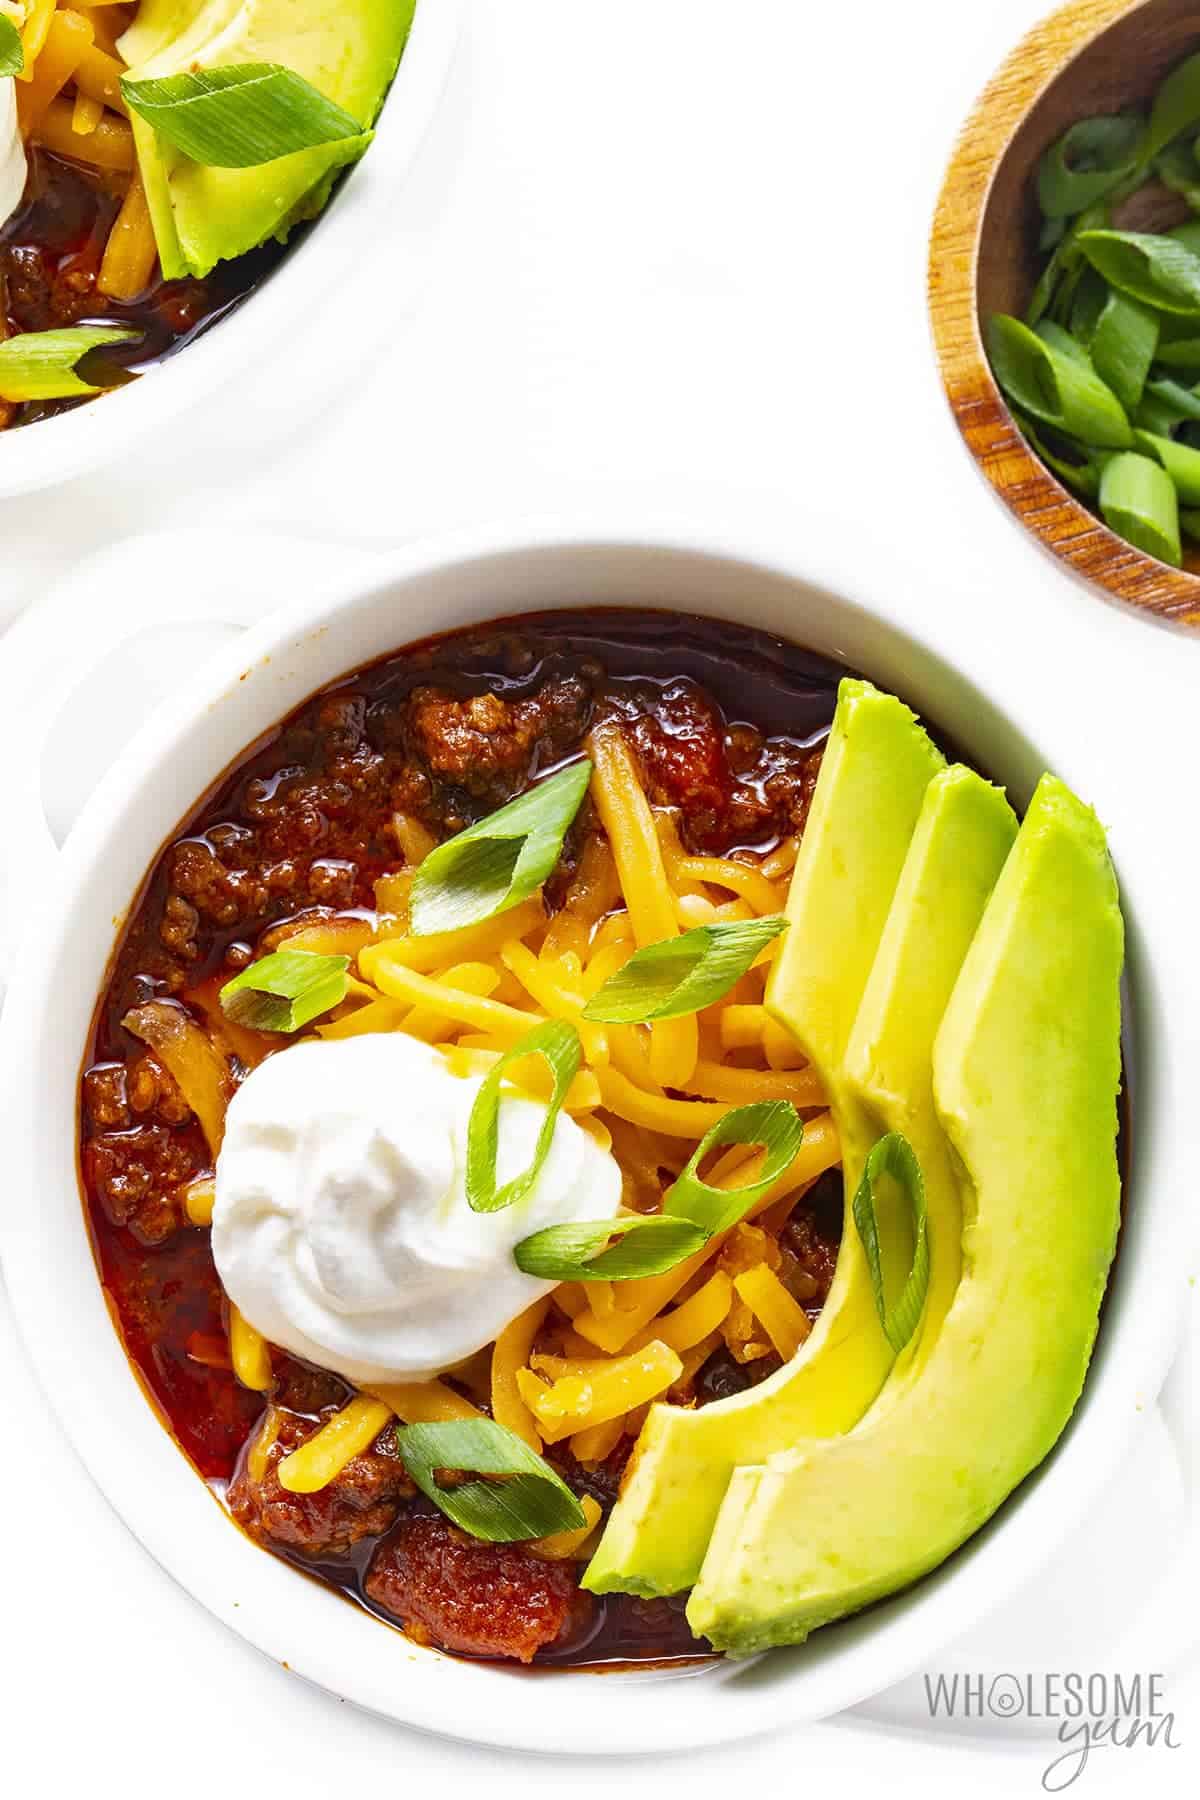 Keto friendly chili in bowls with toppings